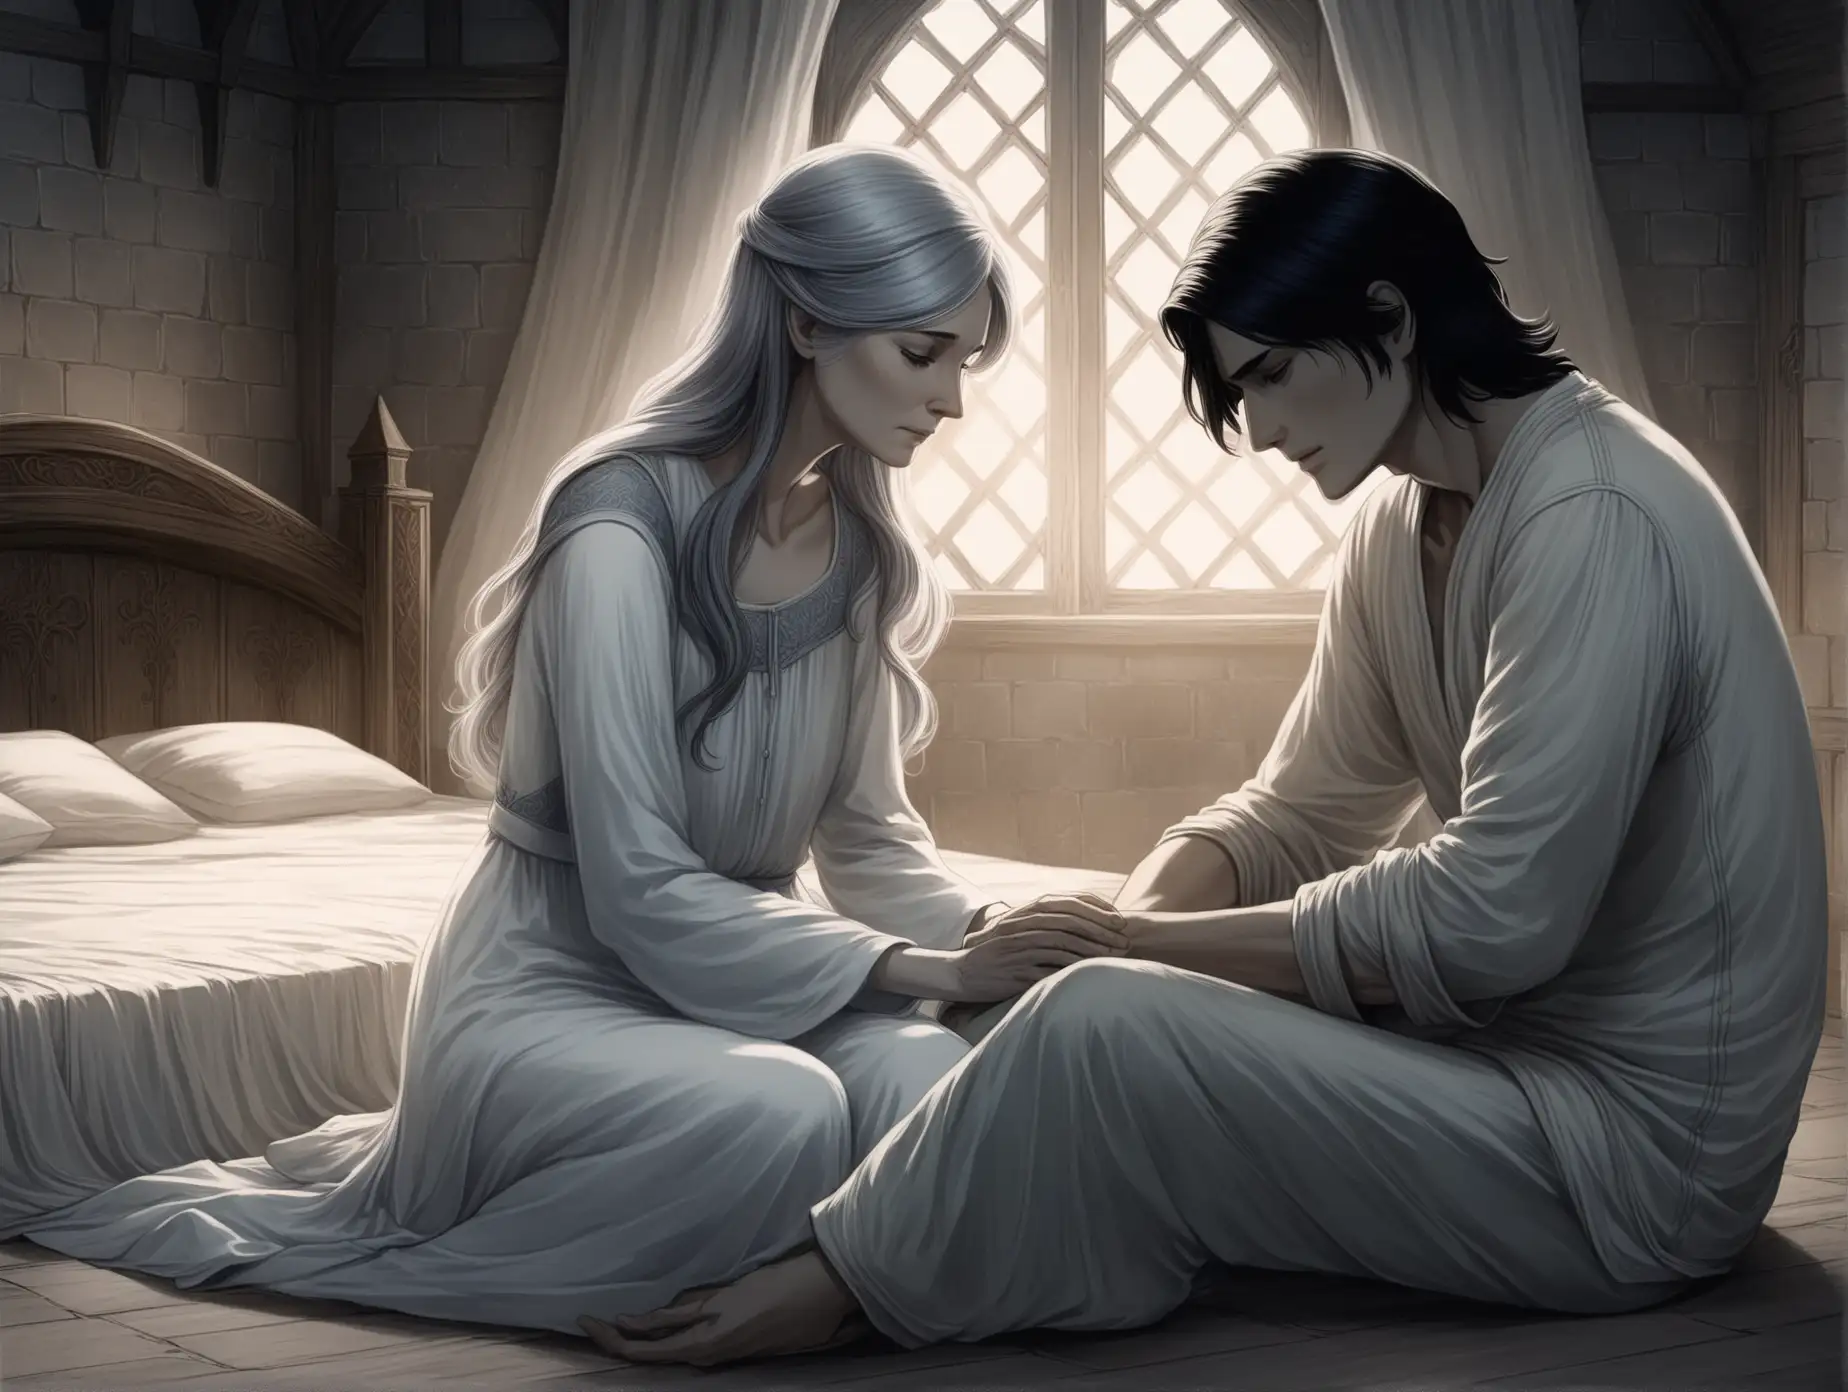 Comforting-Scene-Son-Comforts-Dying-Mother-in-Medieval-Fantasy-Setting